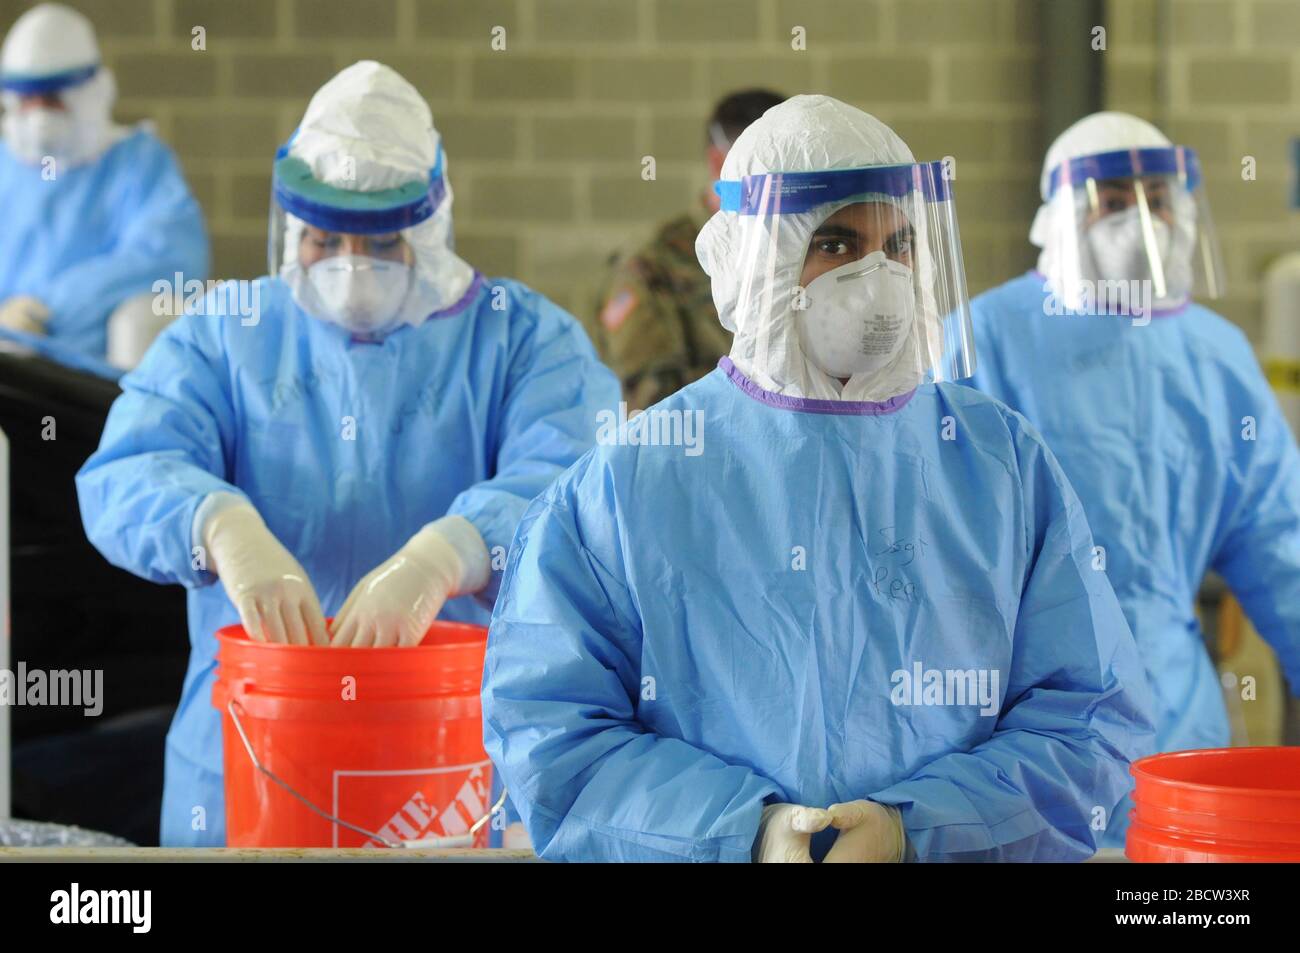 Illinois National Guard medical staff wait to test patients for COVID-19, coronavirus screening at a drive up testing center March 24, 2020 in Chicago, Illinois. Stock Photo